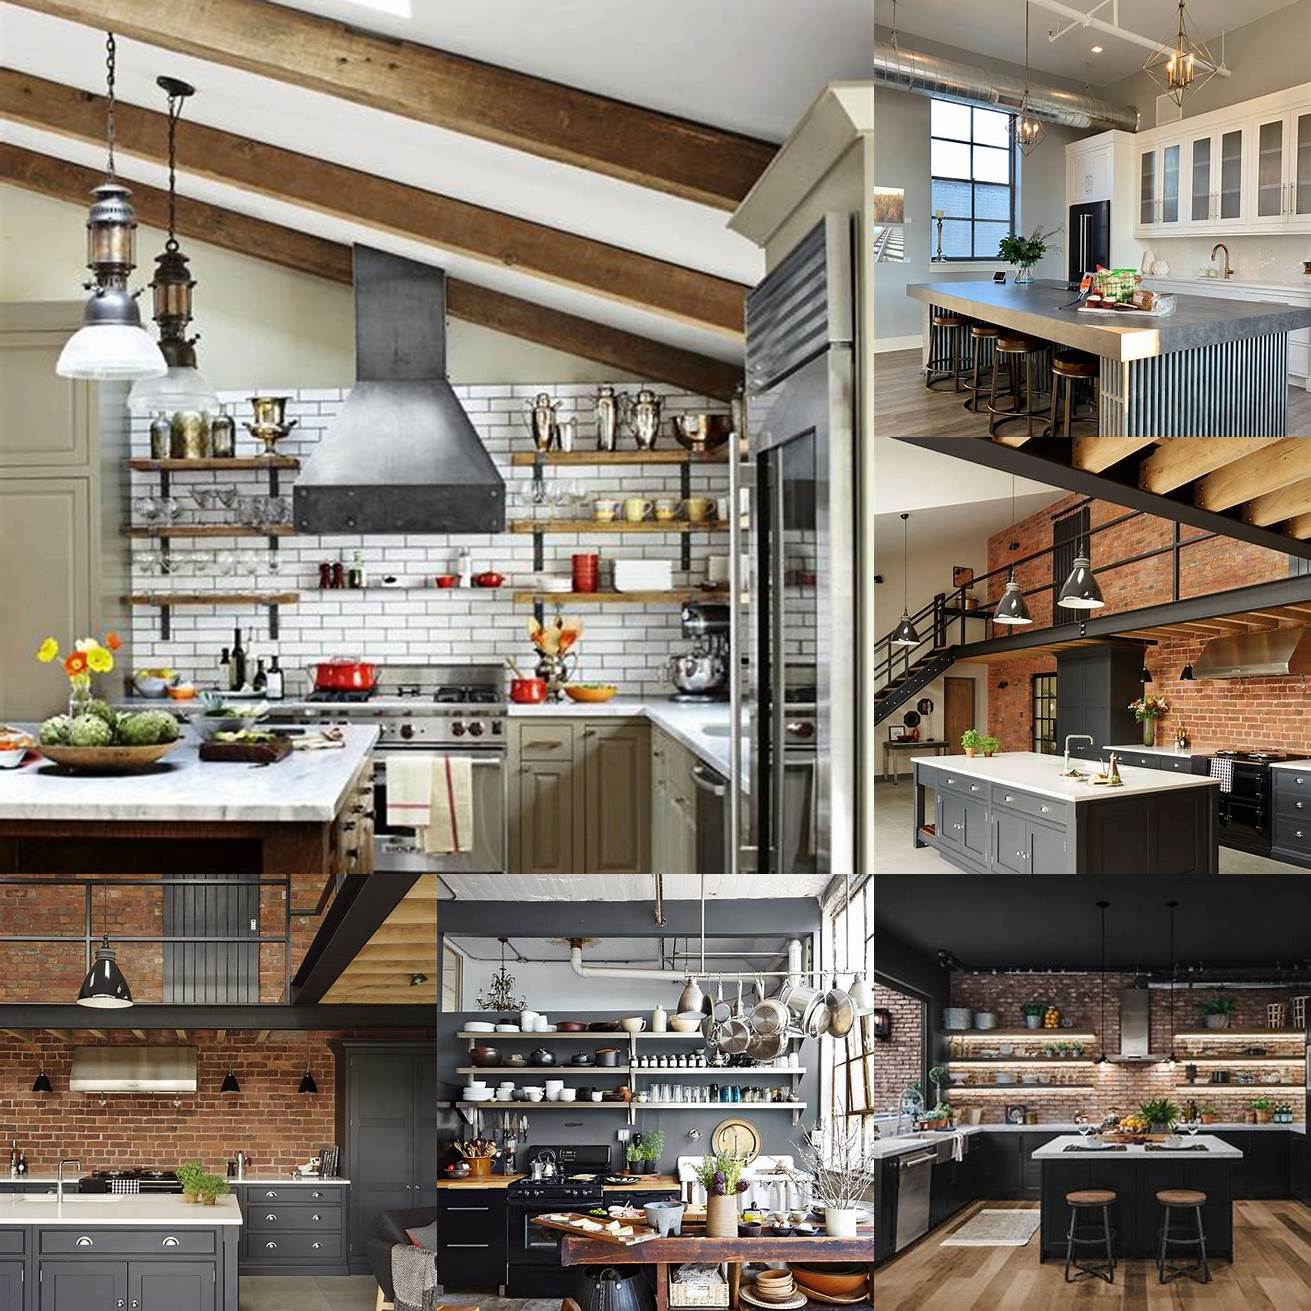 Ample storage space in an industrial kitchen